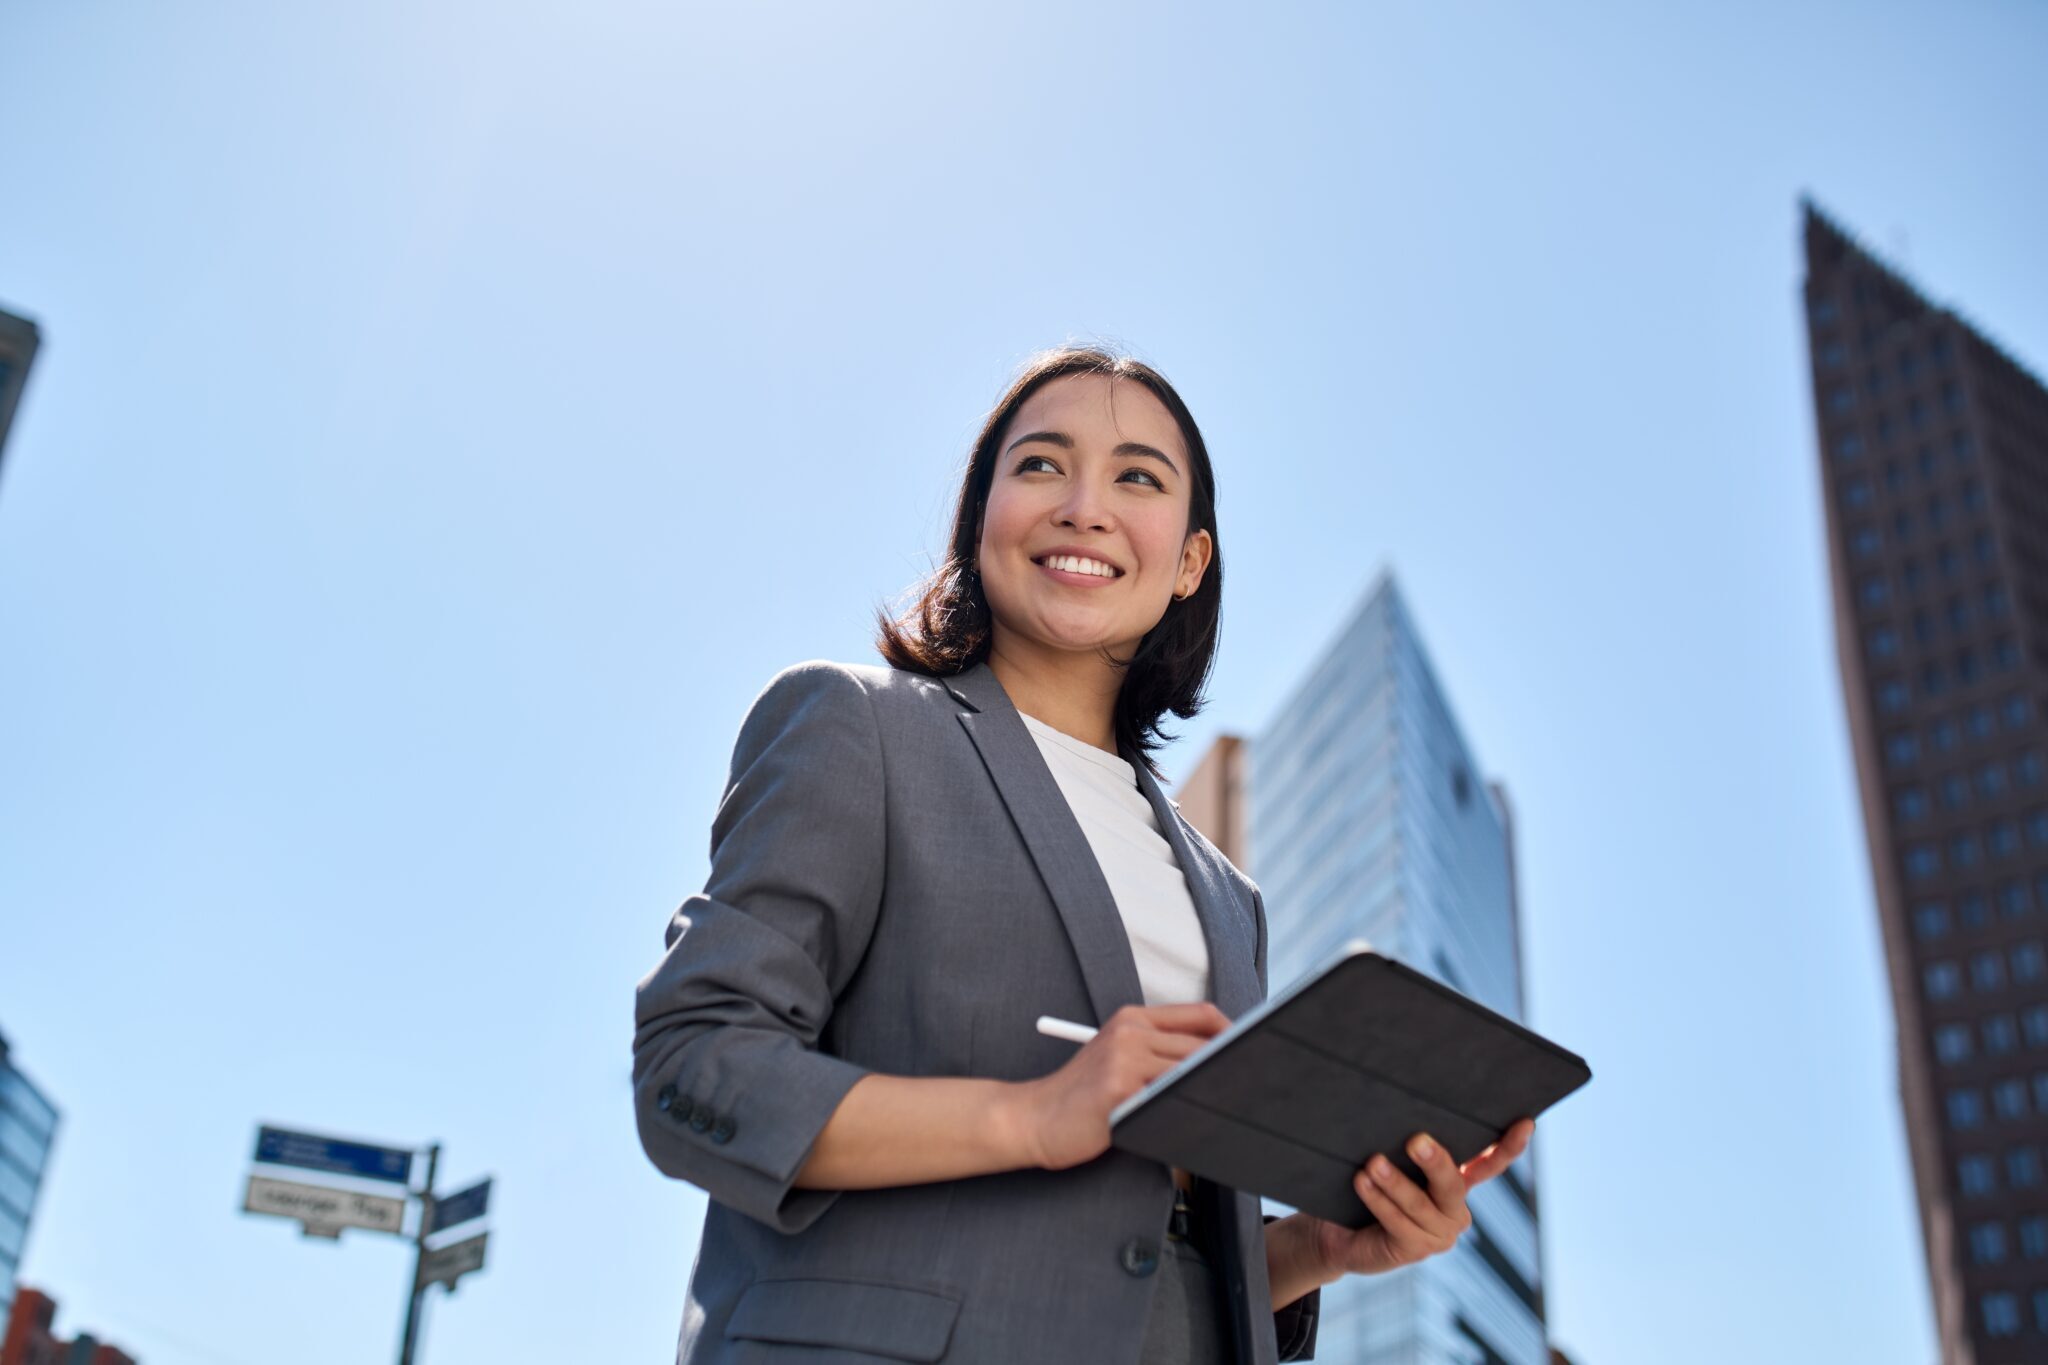 An Asian businesswoman confidently holds a tablet while standing in a bustling city.